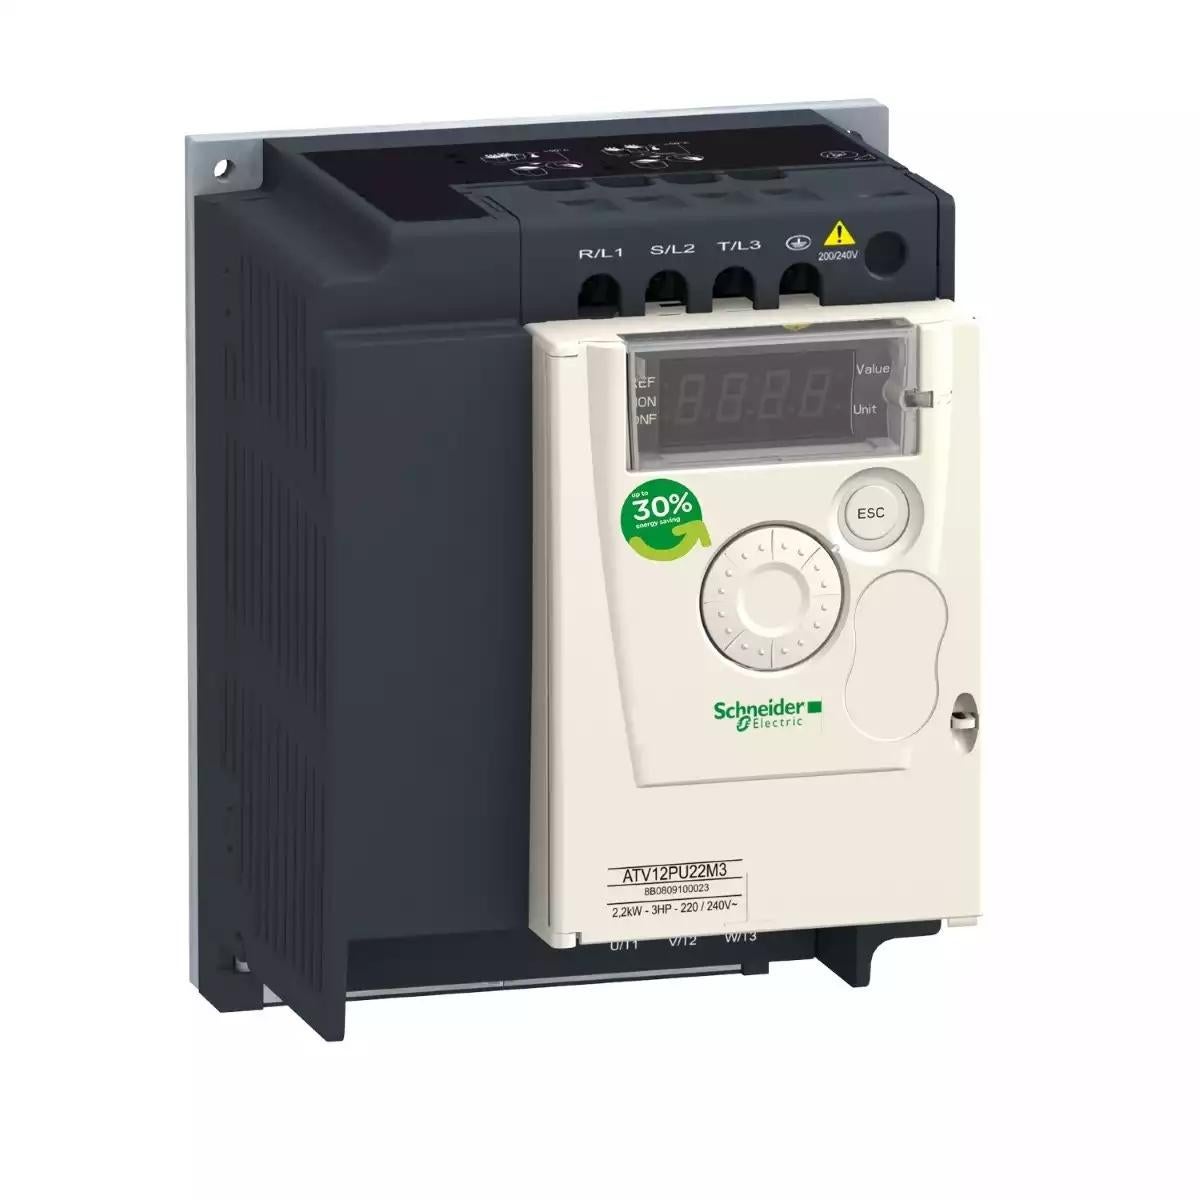 variable speed drive, Altivar 12, 1.5kW, 2hp, 200 to 240V, 3 phases, on base plate